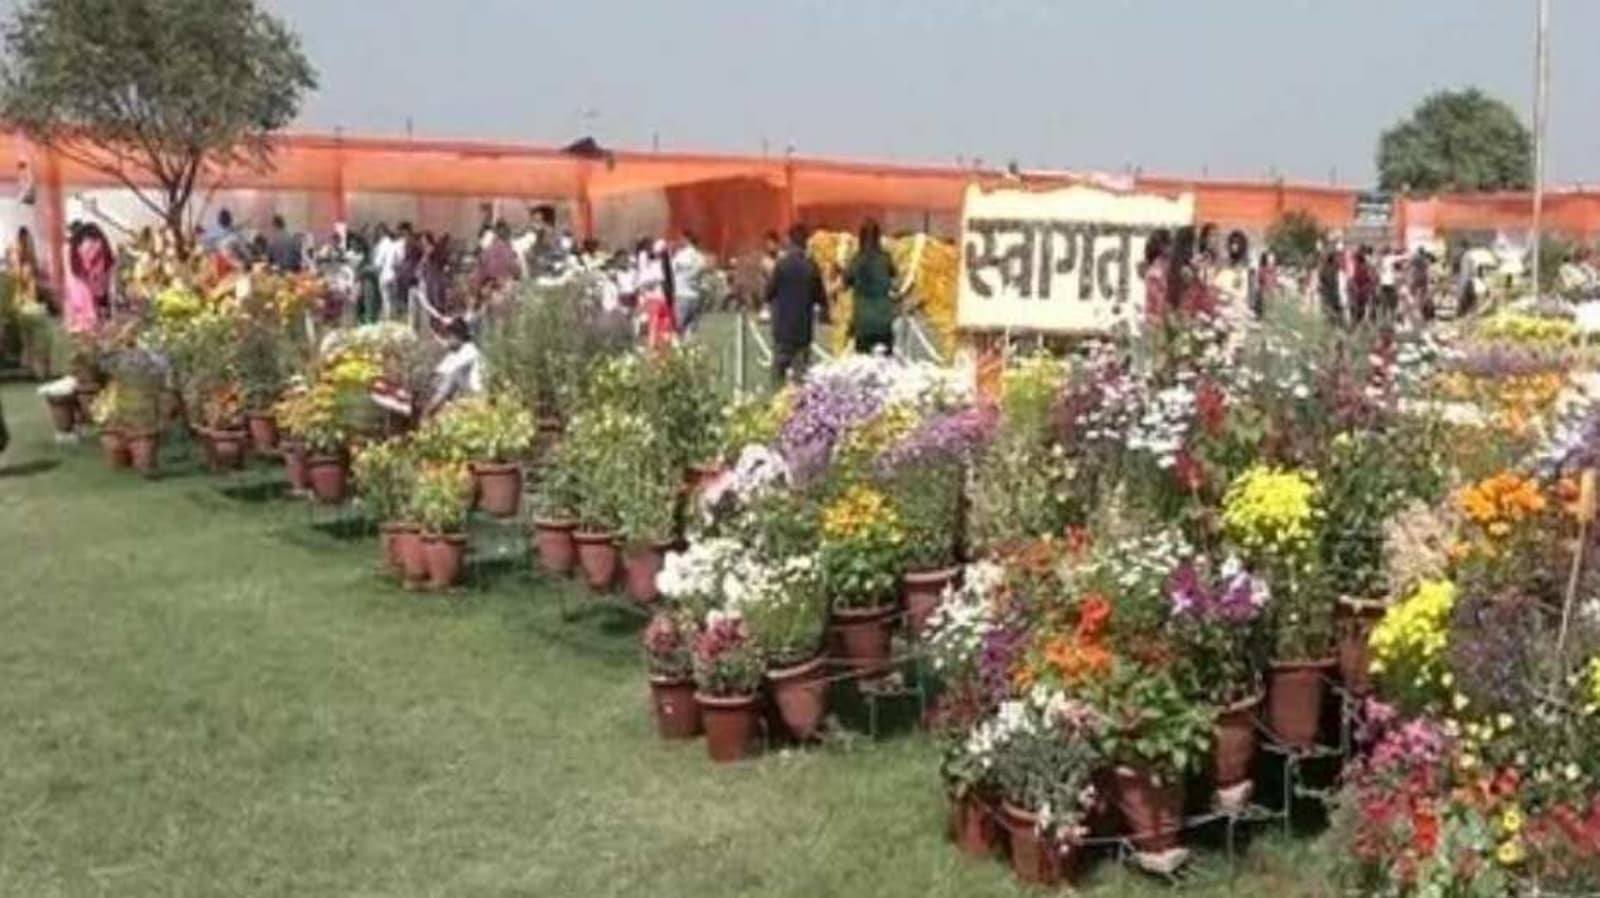 Flower exhibition organised by Agra's horticulture department attracts